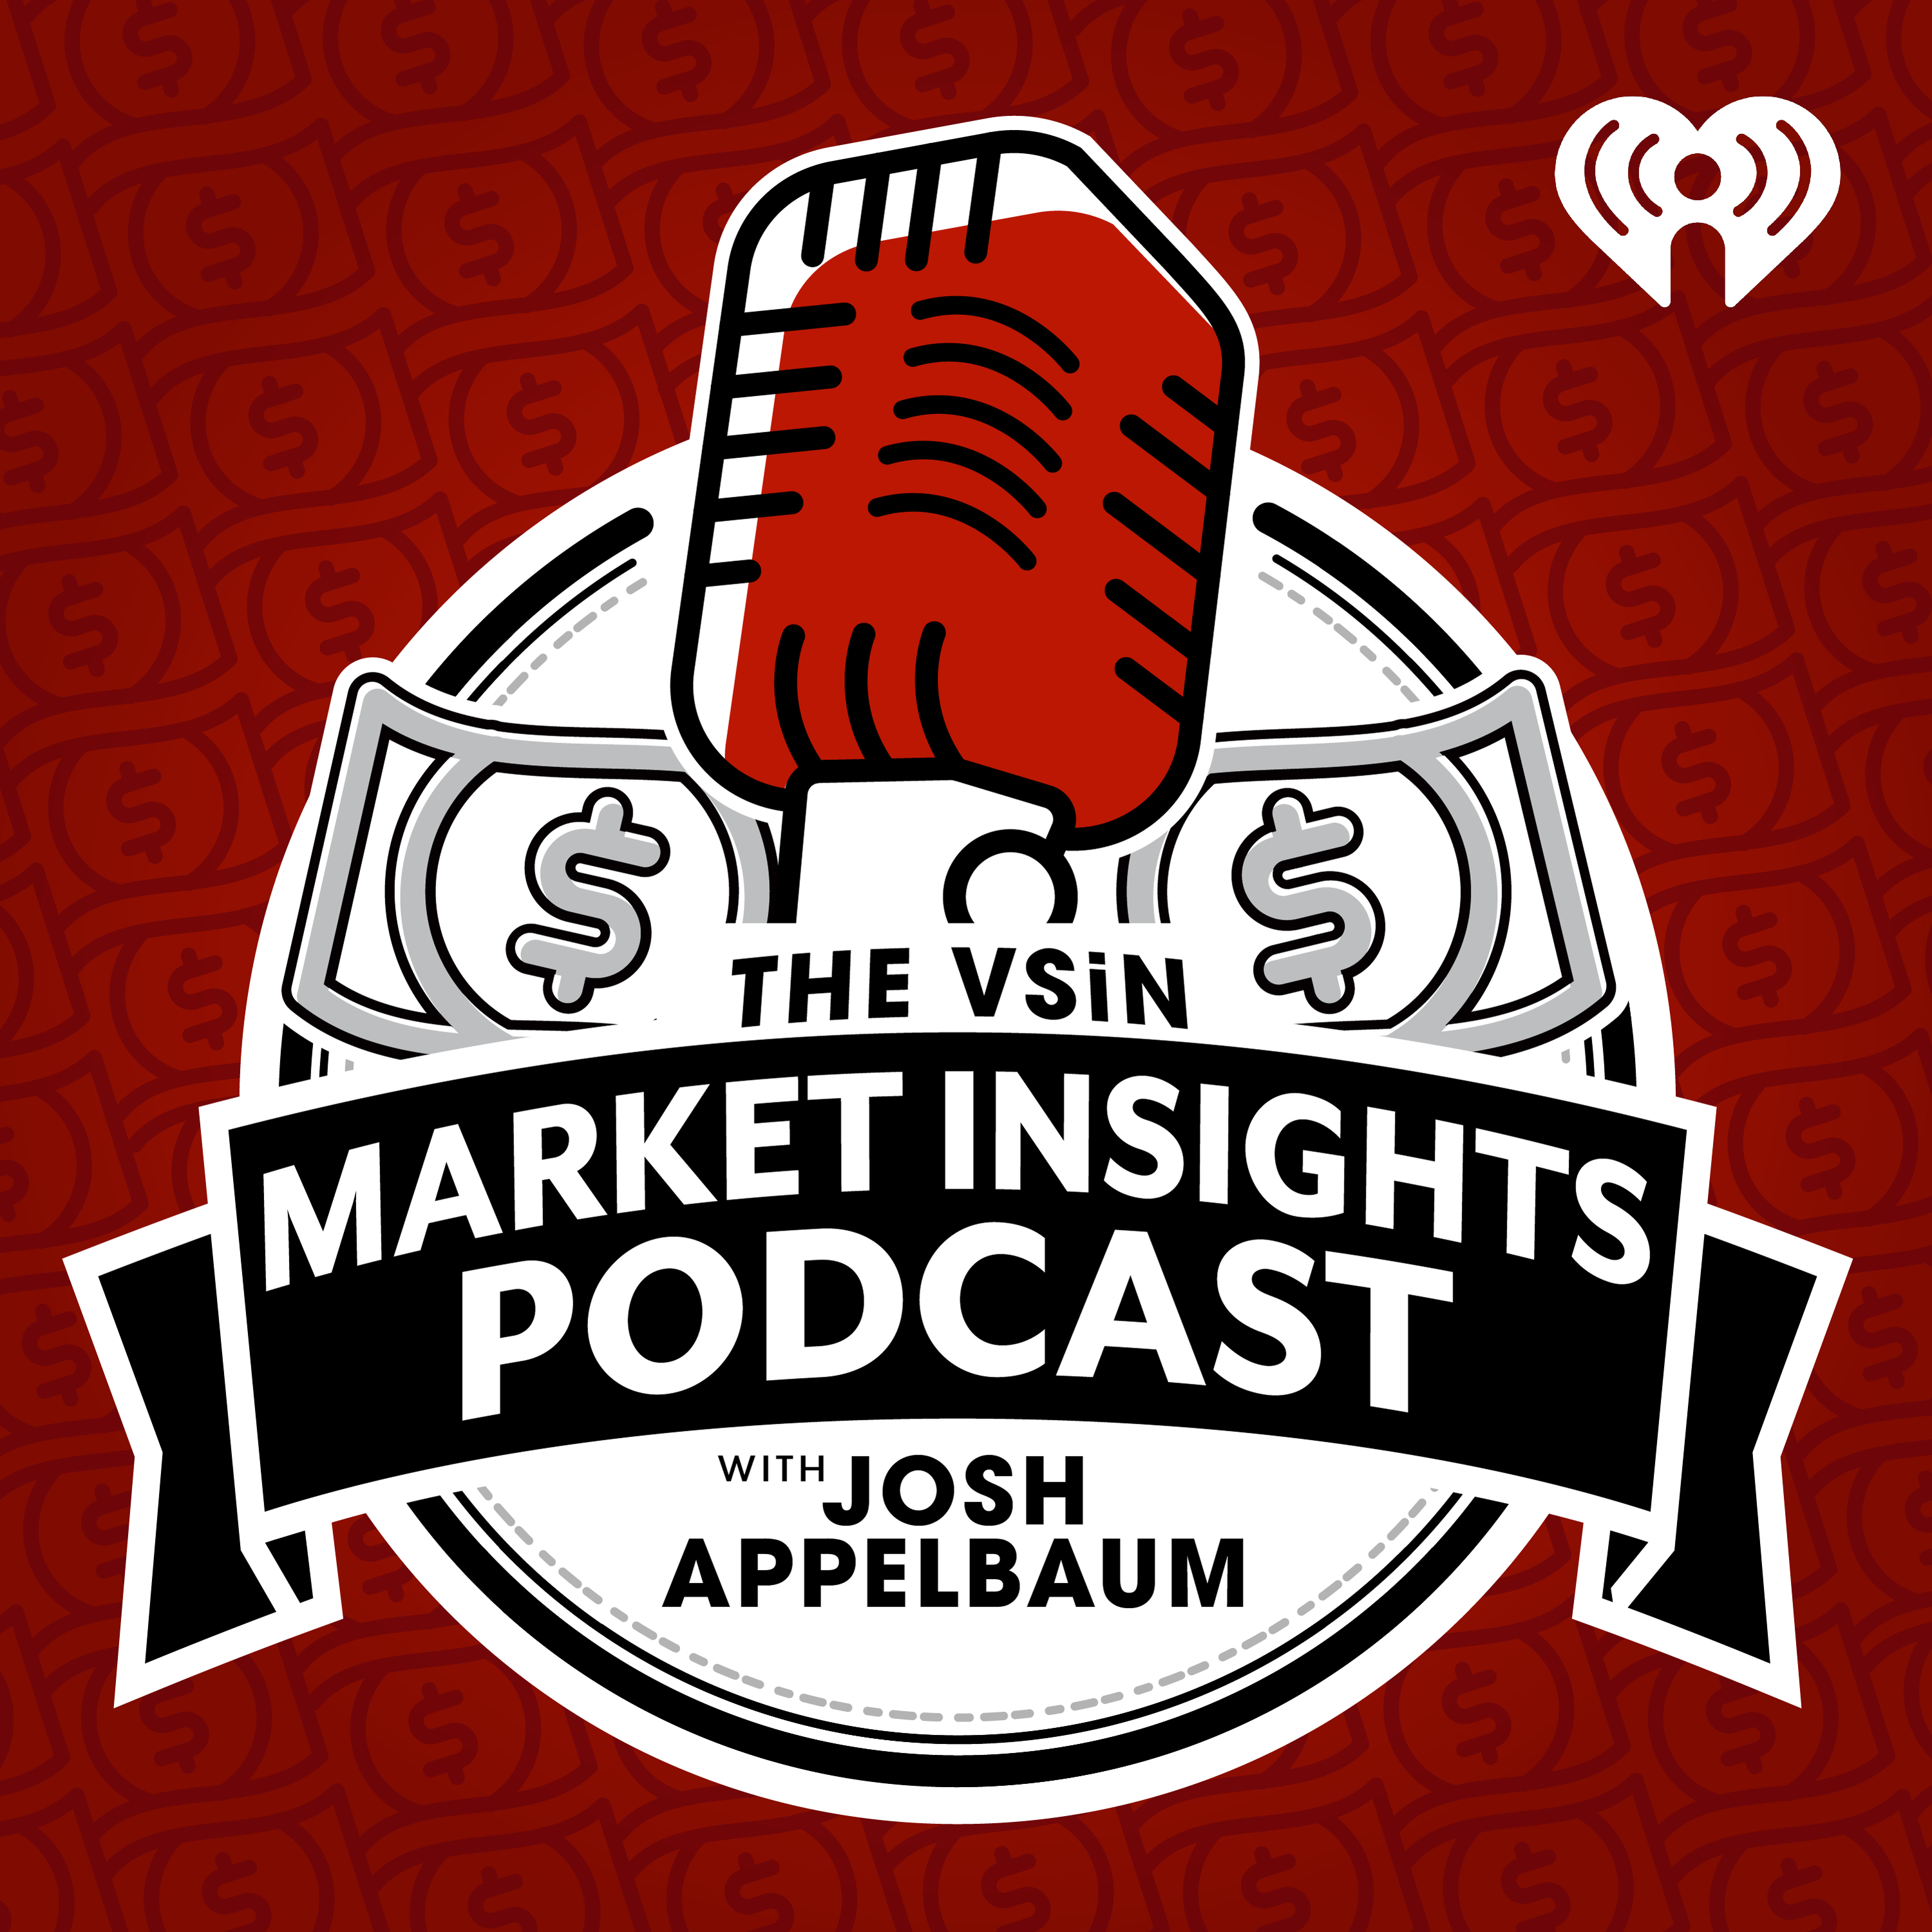 The VSiN Market Insights Podcast with Josh Appelbaum | March 10, 2022